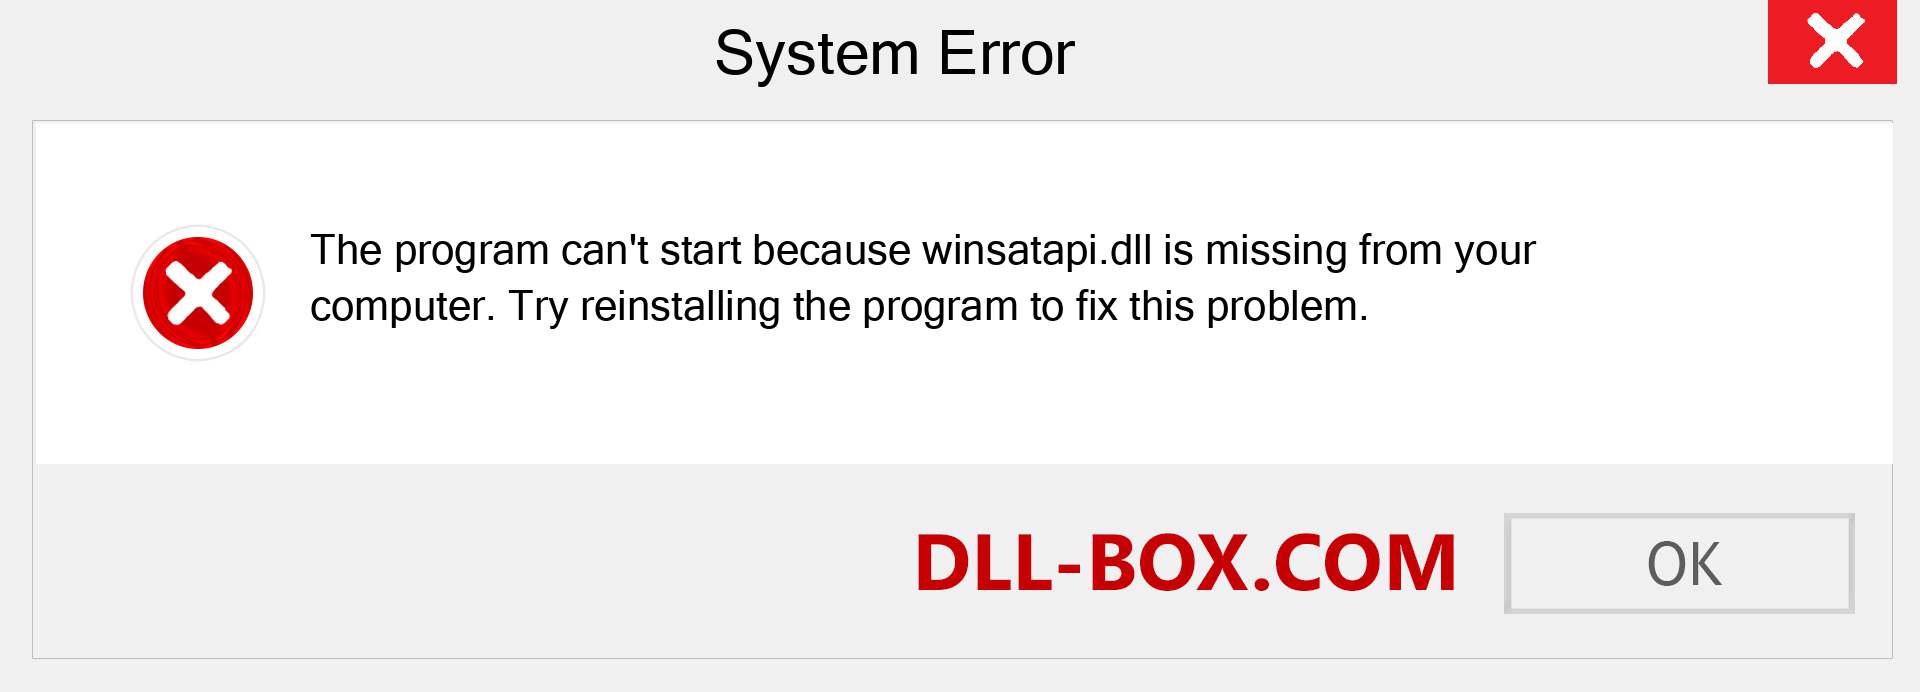  winsatapi.dll file is missing?. Download for Windows 7, 8, 10 - Fix  winsatapi dll Missing Error on Windows, photos, images